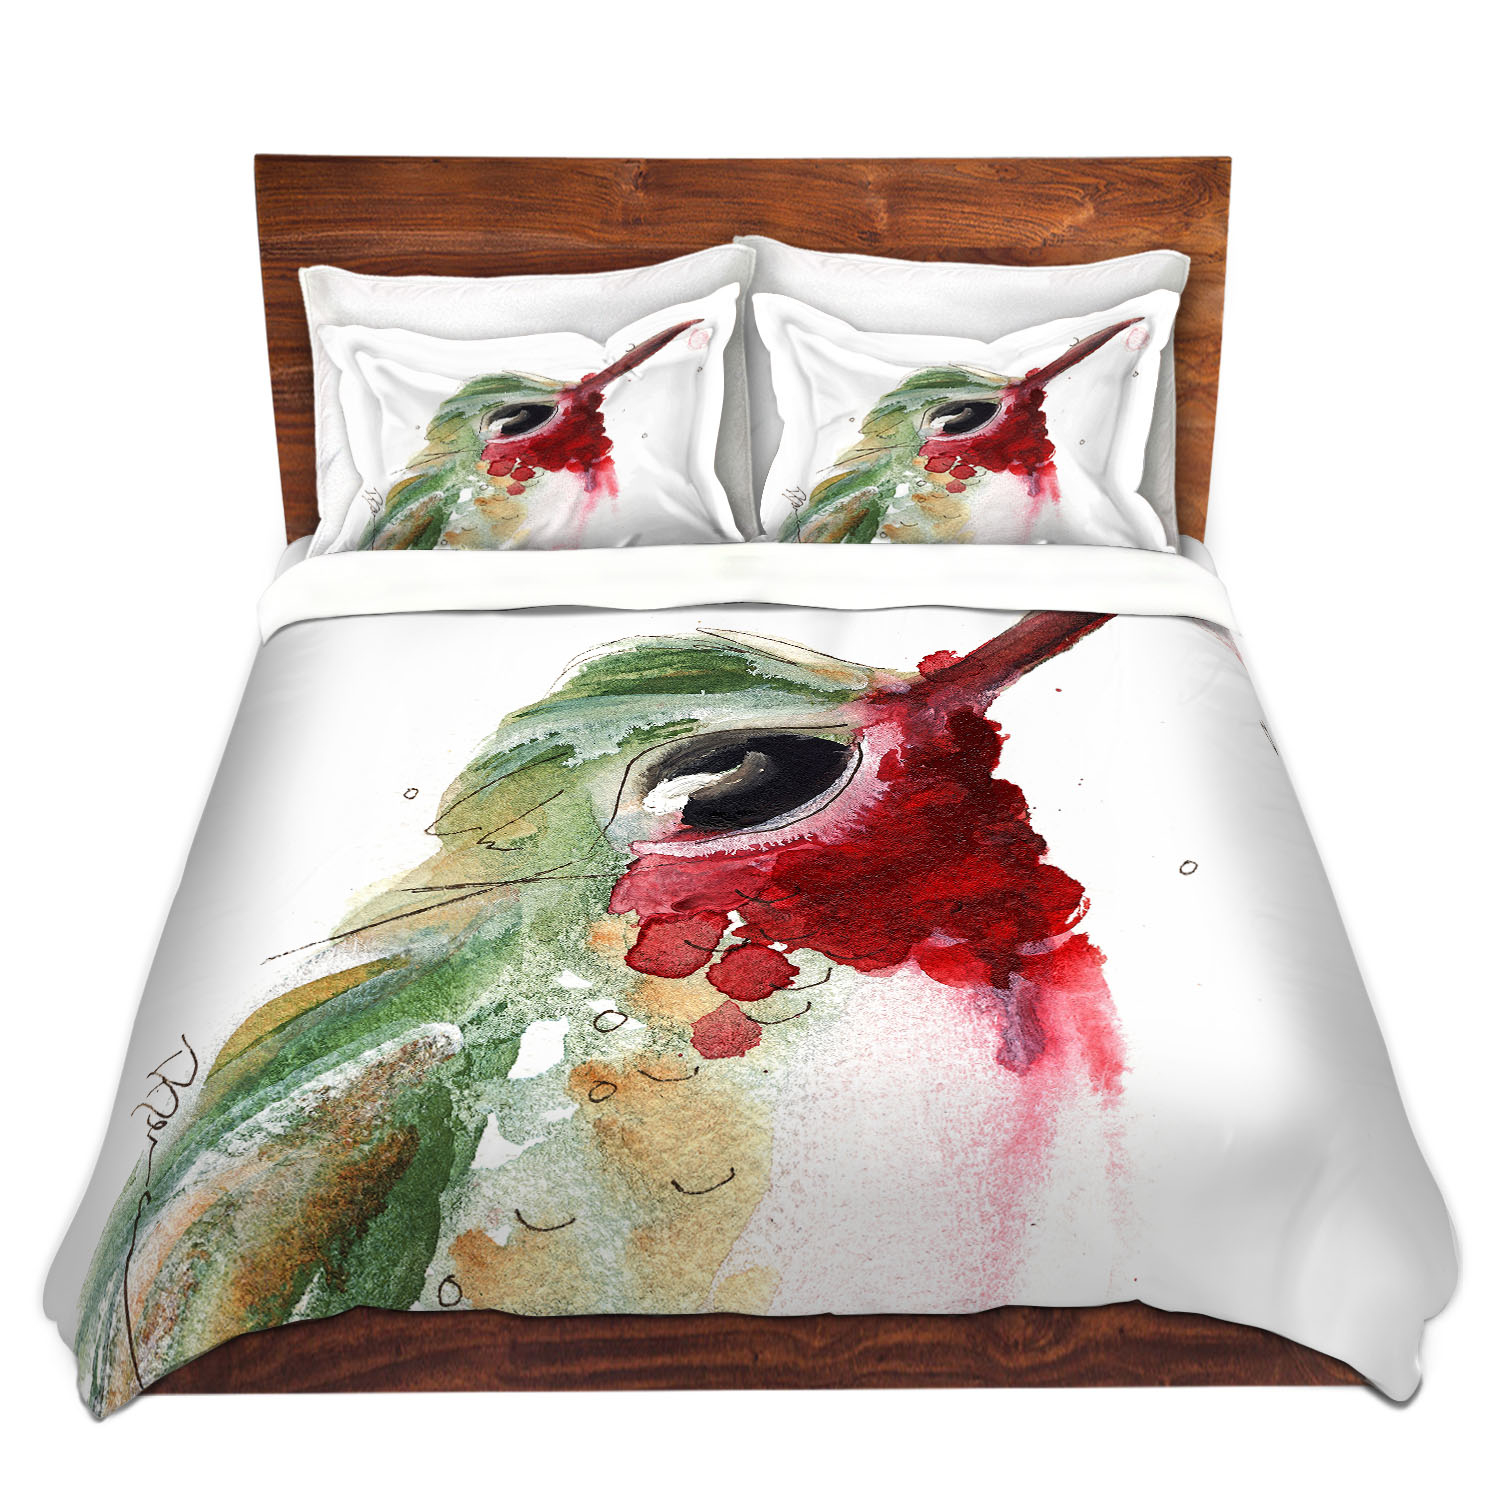 Dianoche Microfiber Duvet Covers By Dawn Derman - Broadtail Hummer